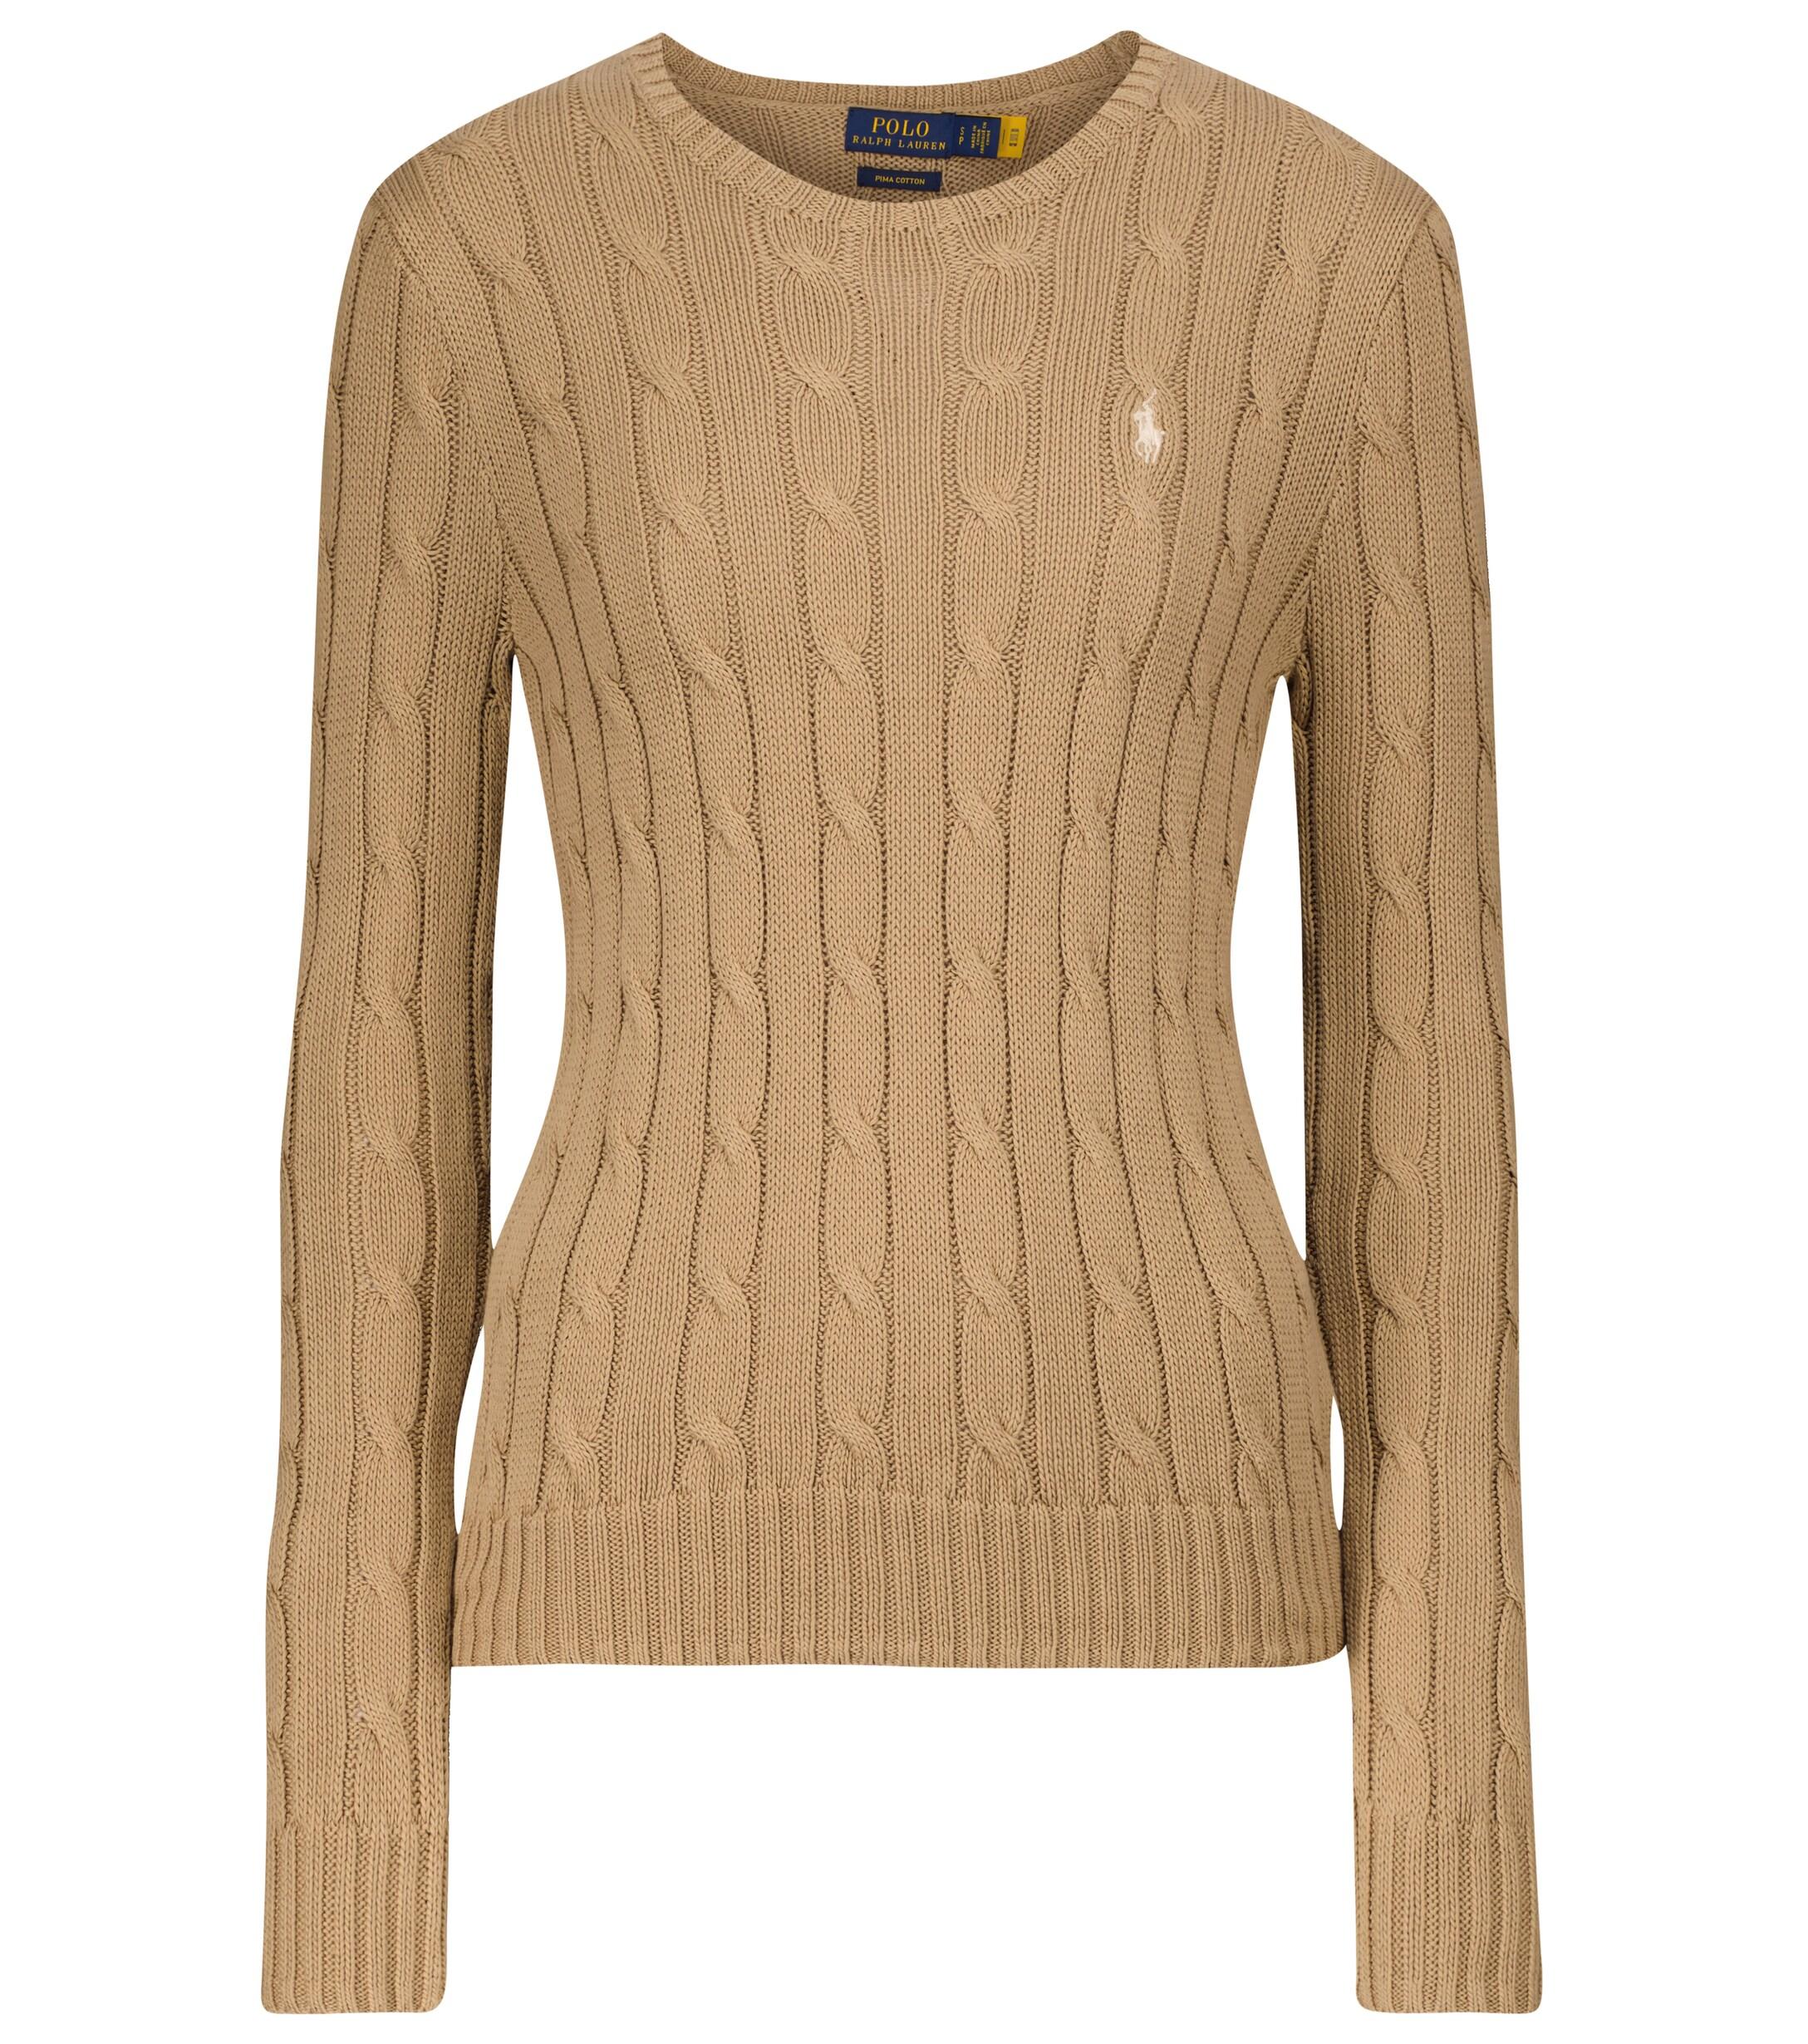 Polo Ralph Lauren Cashmere Cardigan in Brown Natural Womens Jumpers and knitwear Polo Ralph Lauren Jumpers and knitwear 